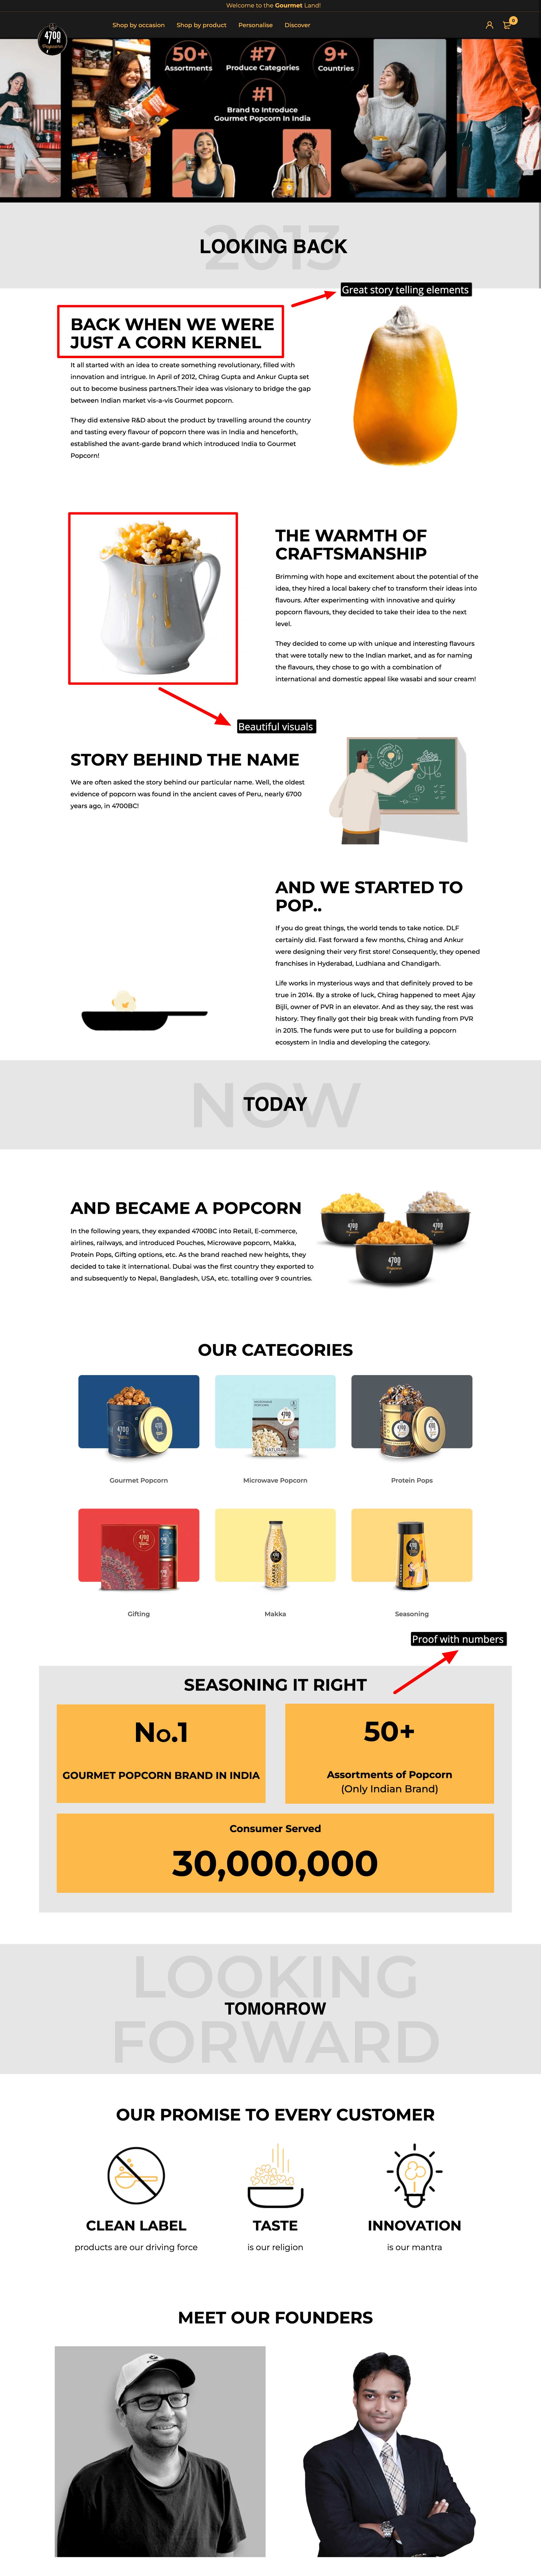 about us page content ecommerce